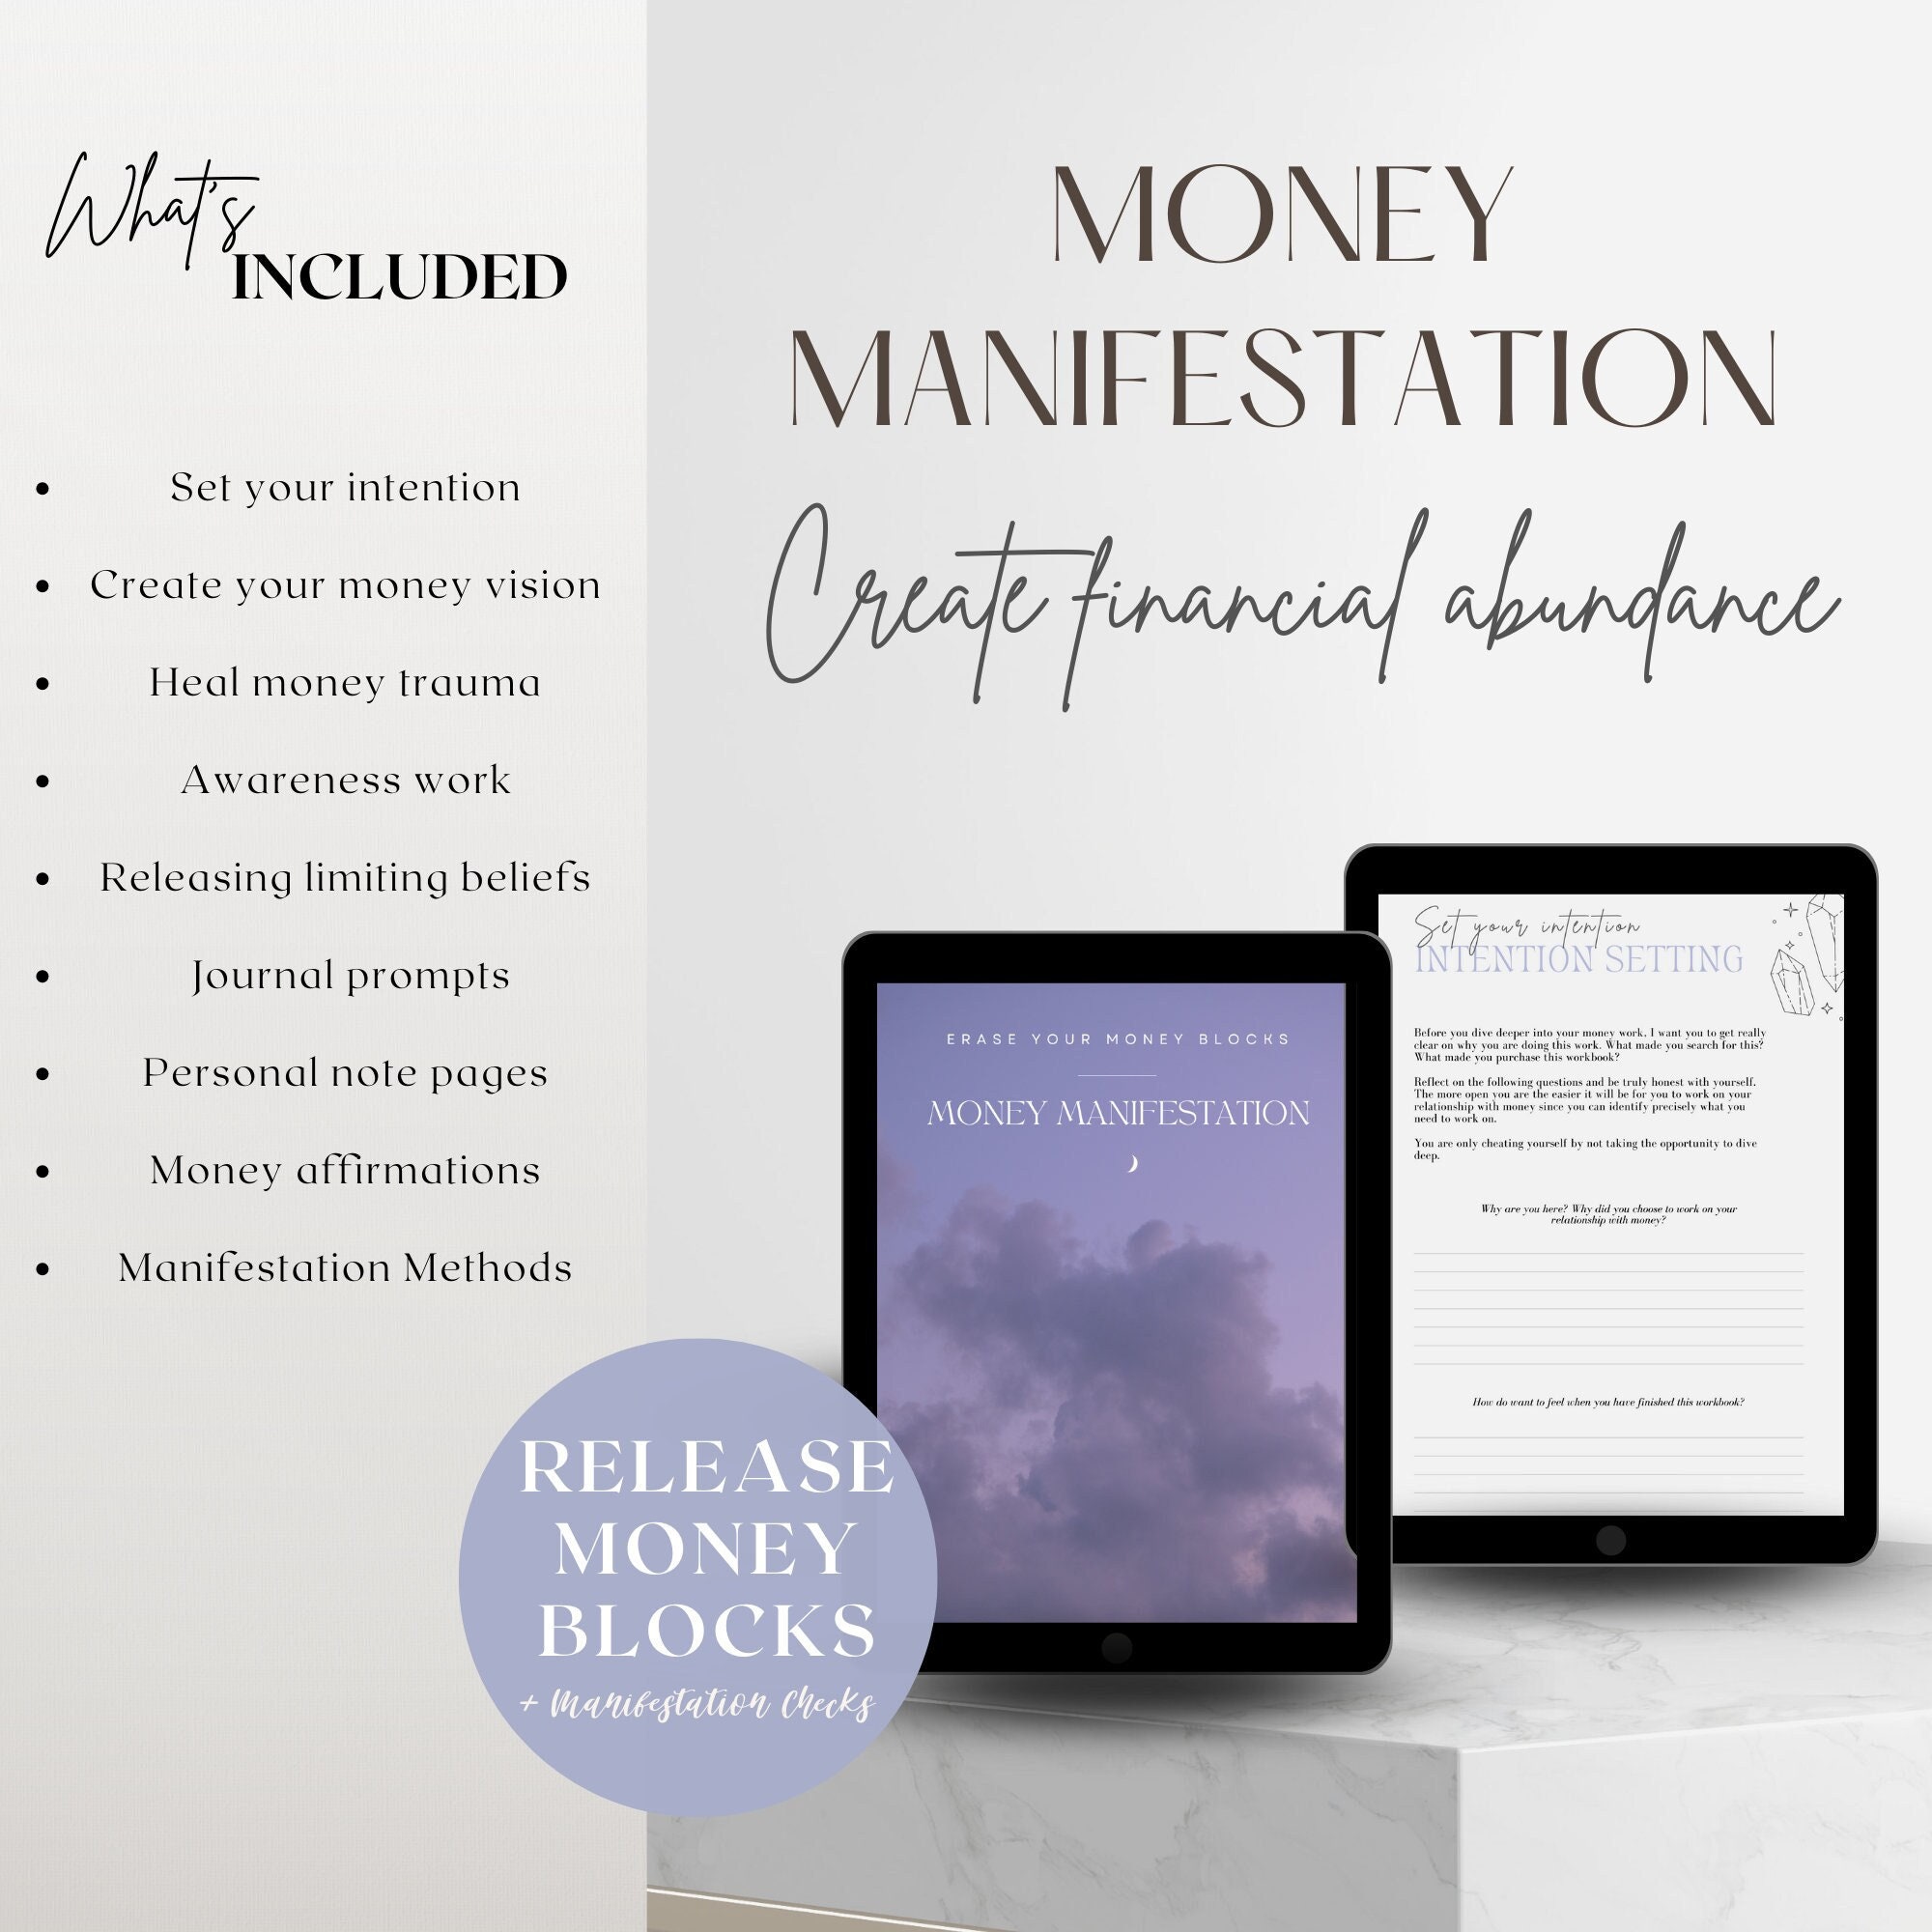 Wealth Manifestation Is Crucial To Your Business. Learn Why!